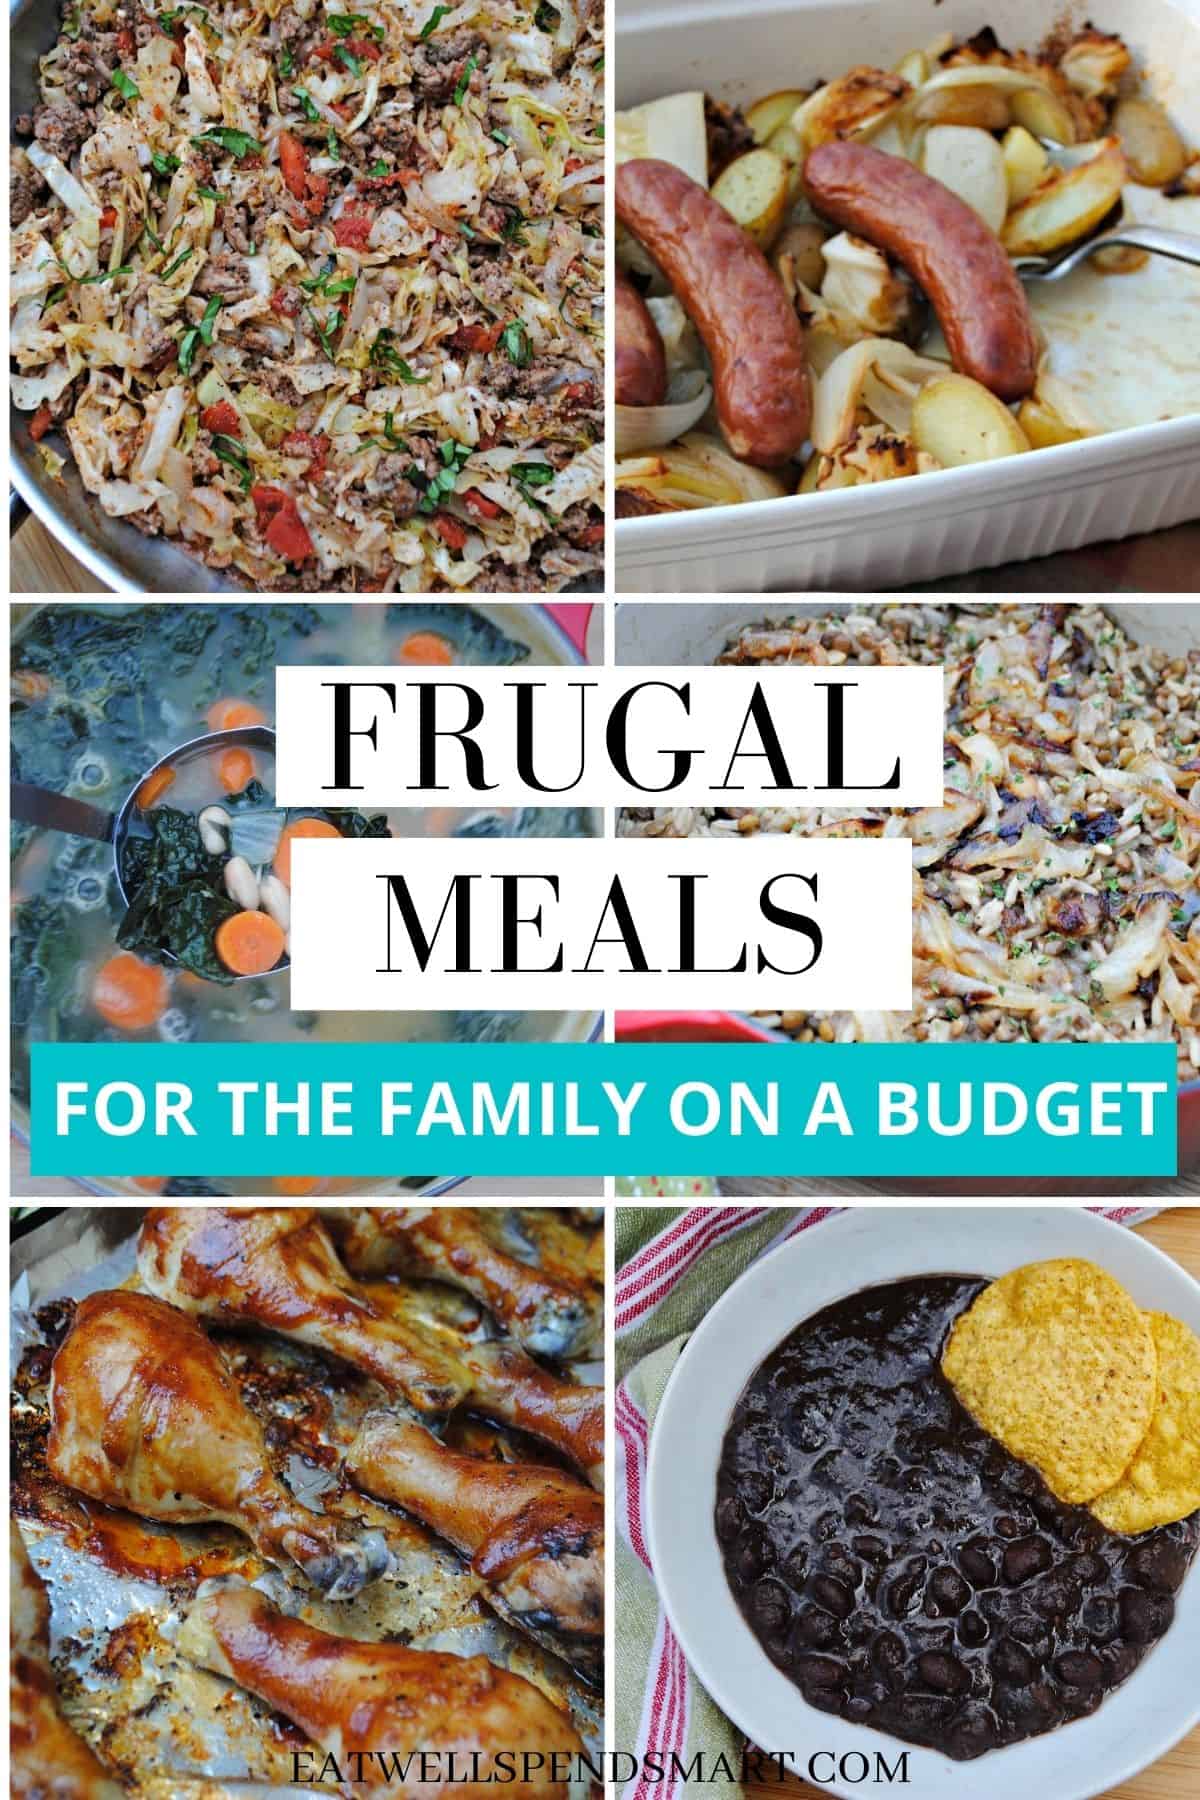 Frugal dining offers